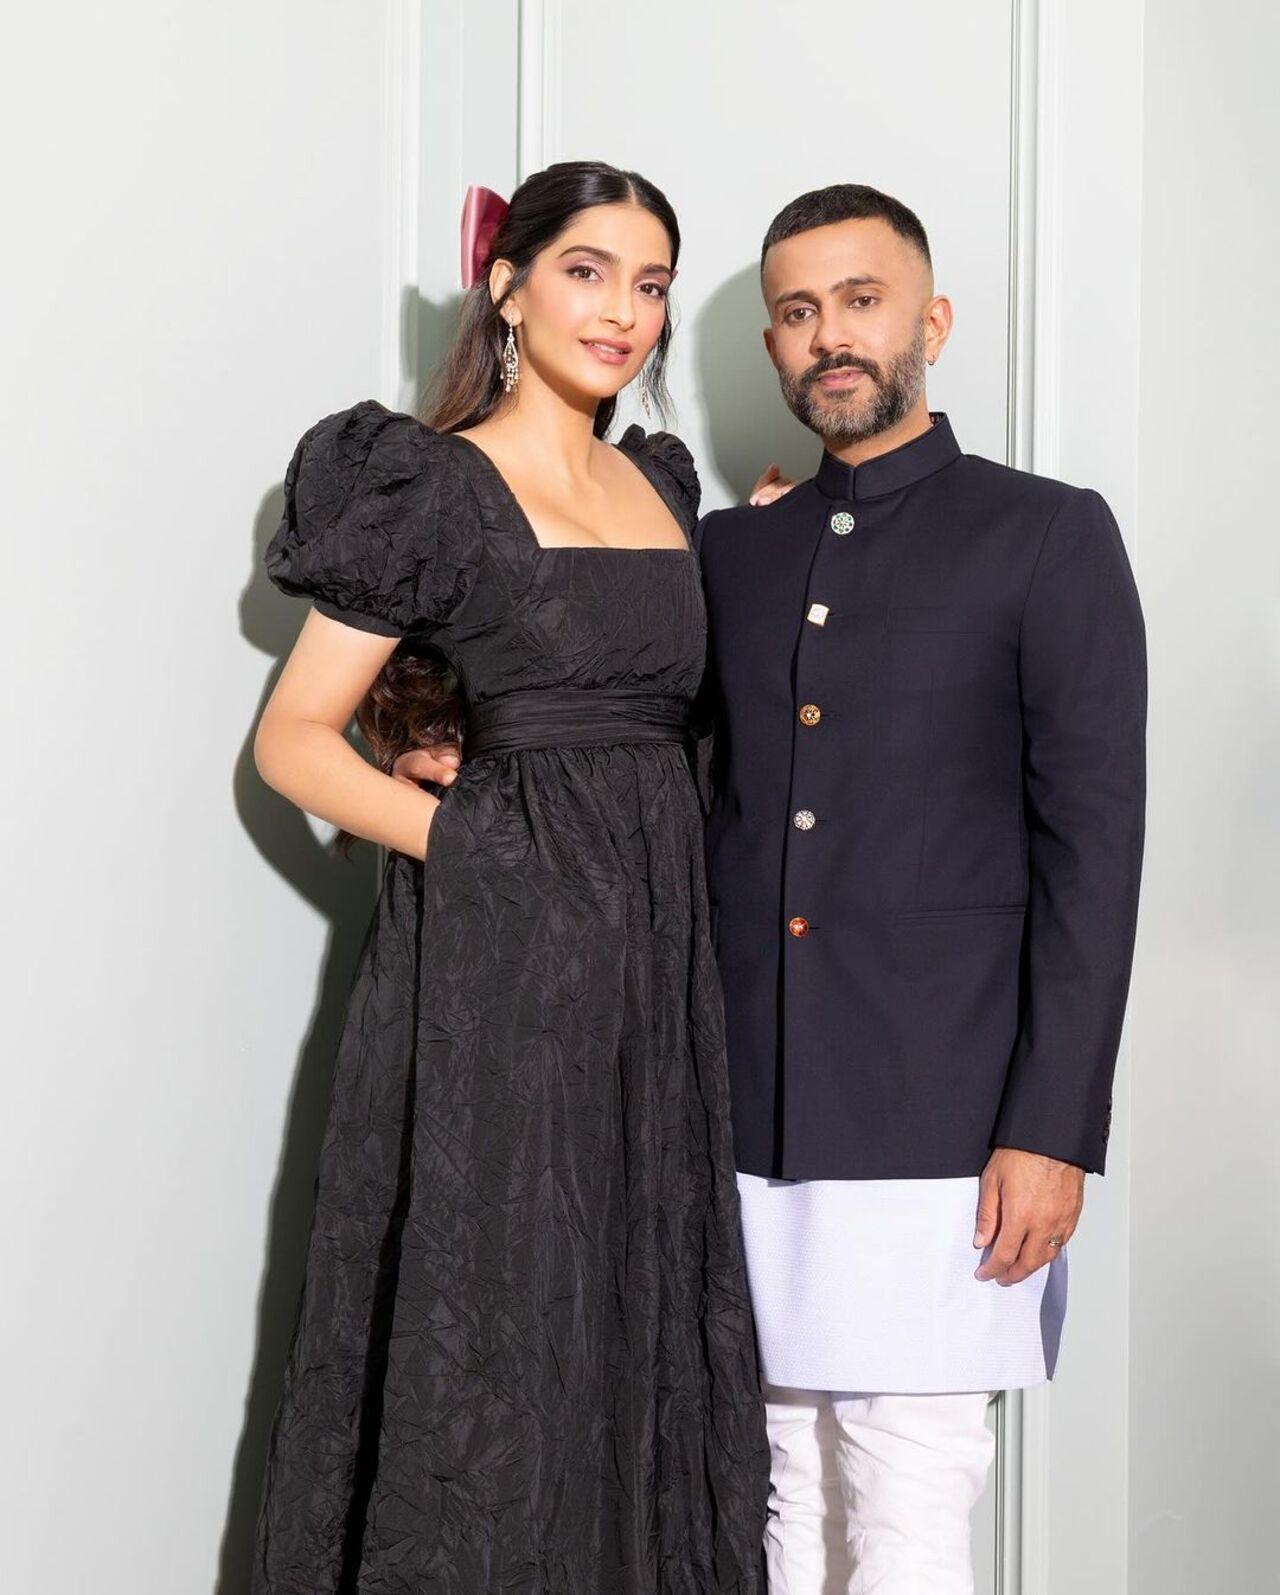 Love was in the air for Sonam as she also whisked her husband Anand Ahuja for a date night amid work commitments